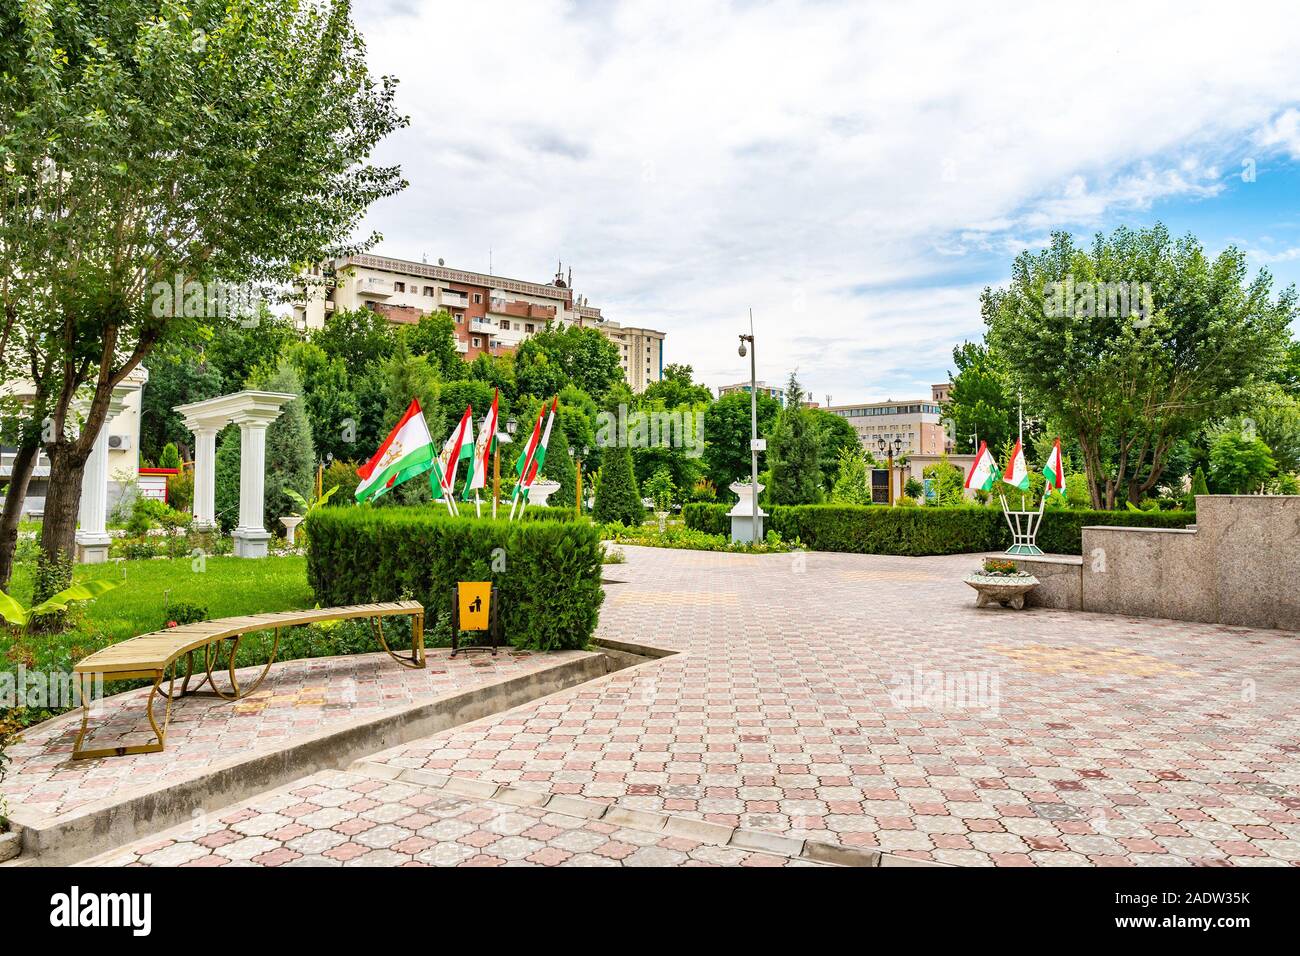 Dushanbe Amphitheater Park Picturesque Garden View with Tajikistan Flags at Ismoil Somoni Avenue on a Cloudy Rainy Sky Day Stock Photo